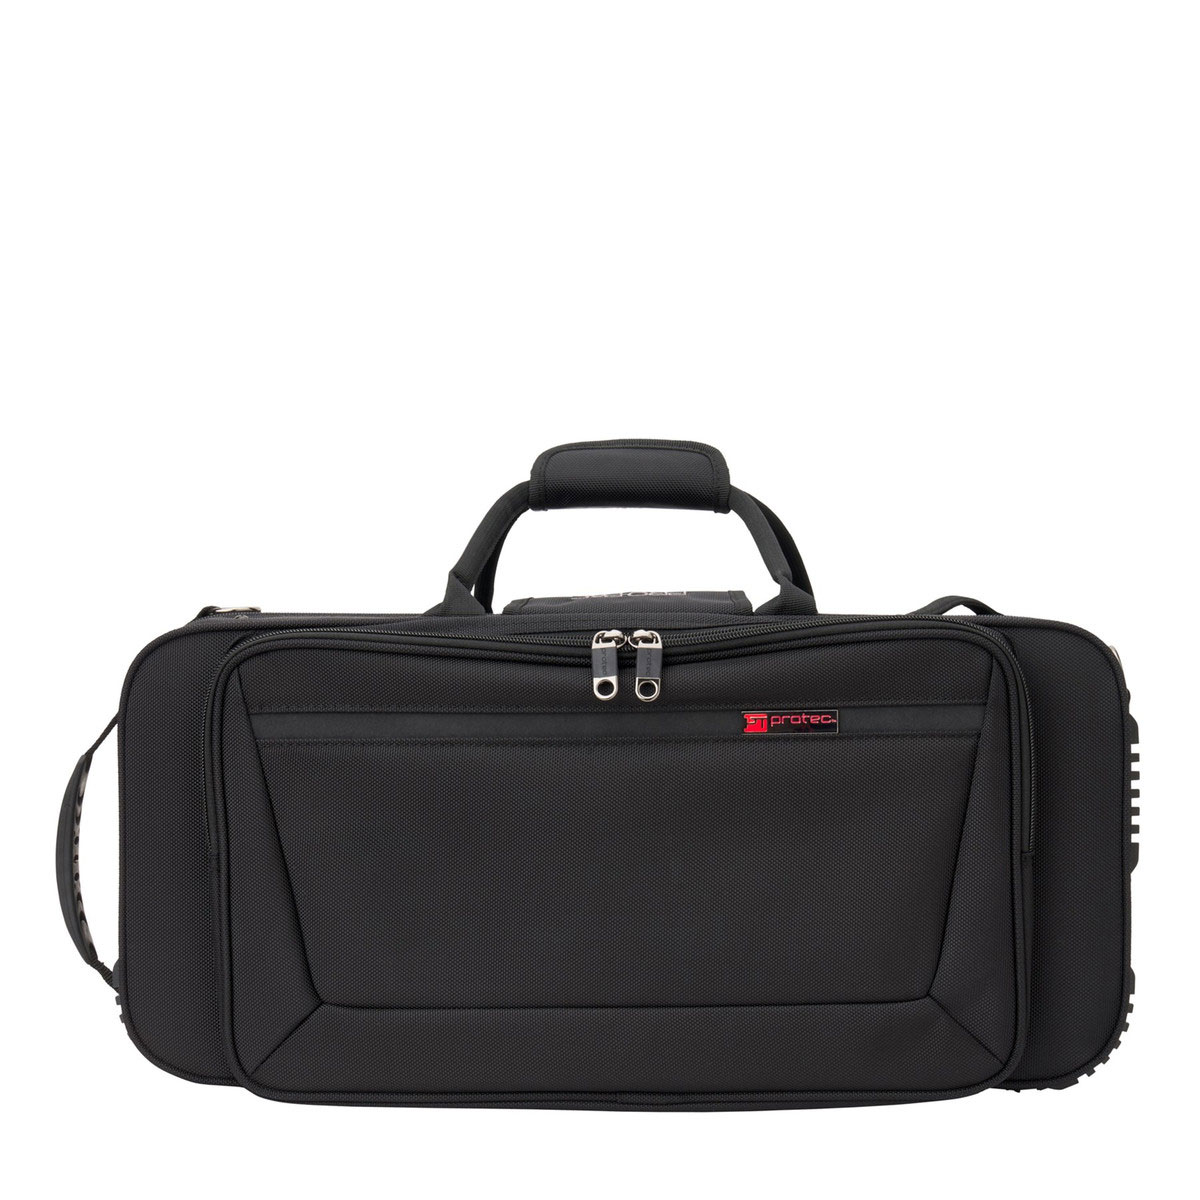 PROTEC TRUMPET PRO PAC CASE WITH MUTE COMPARTMENT - BLACK